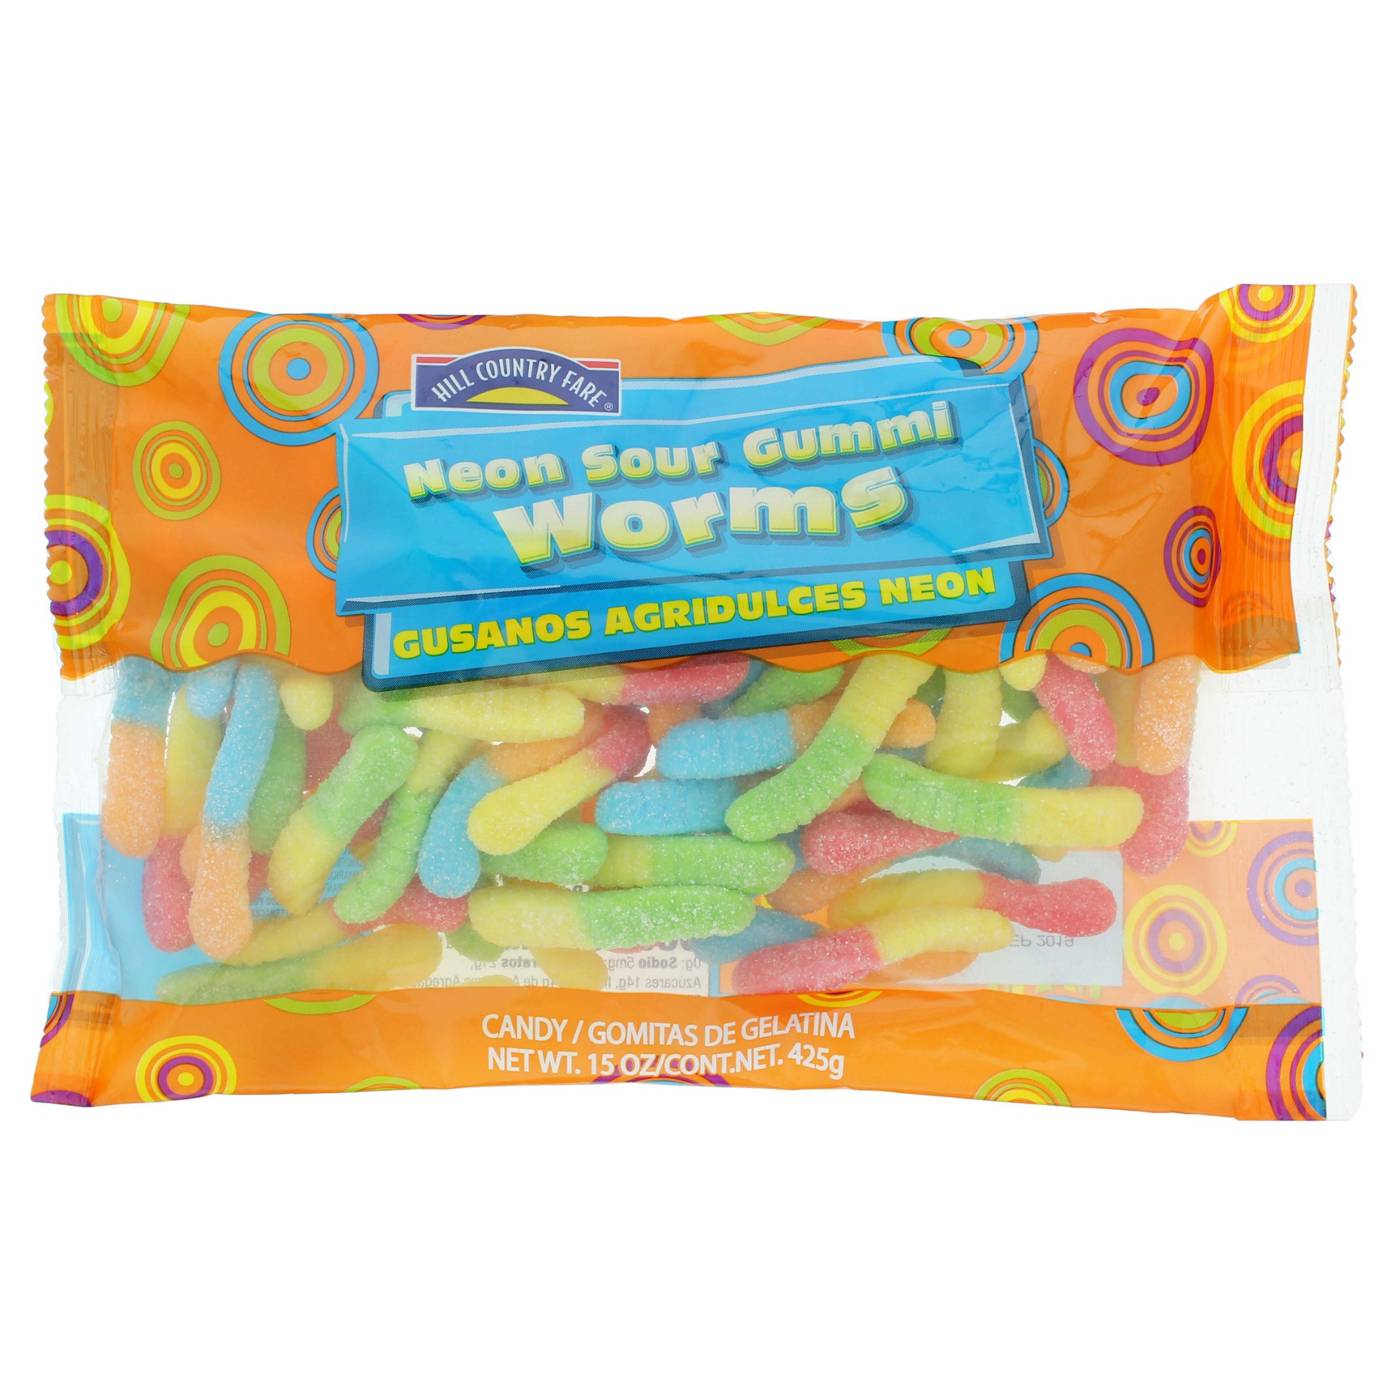 Hill Country Fare Neon Sour Gummi Worms; image 2 of 2